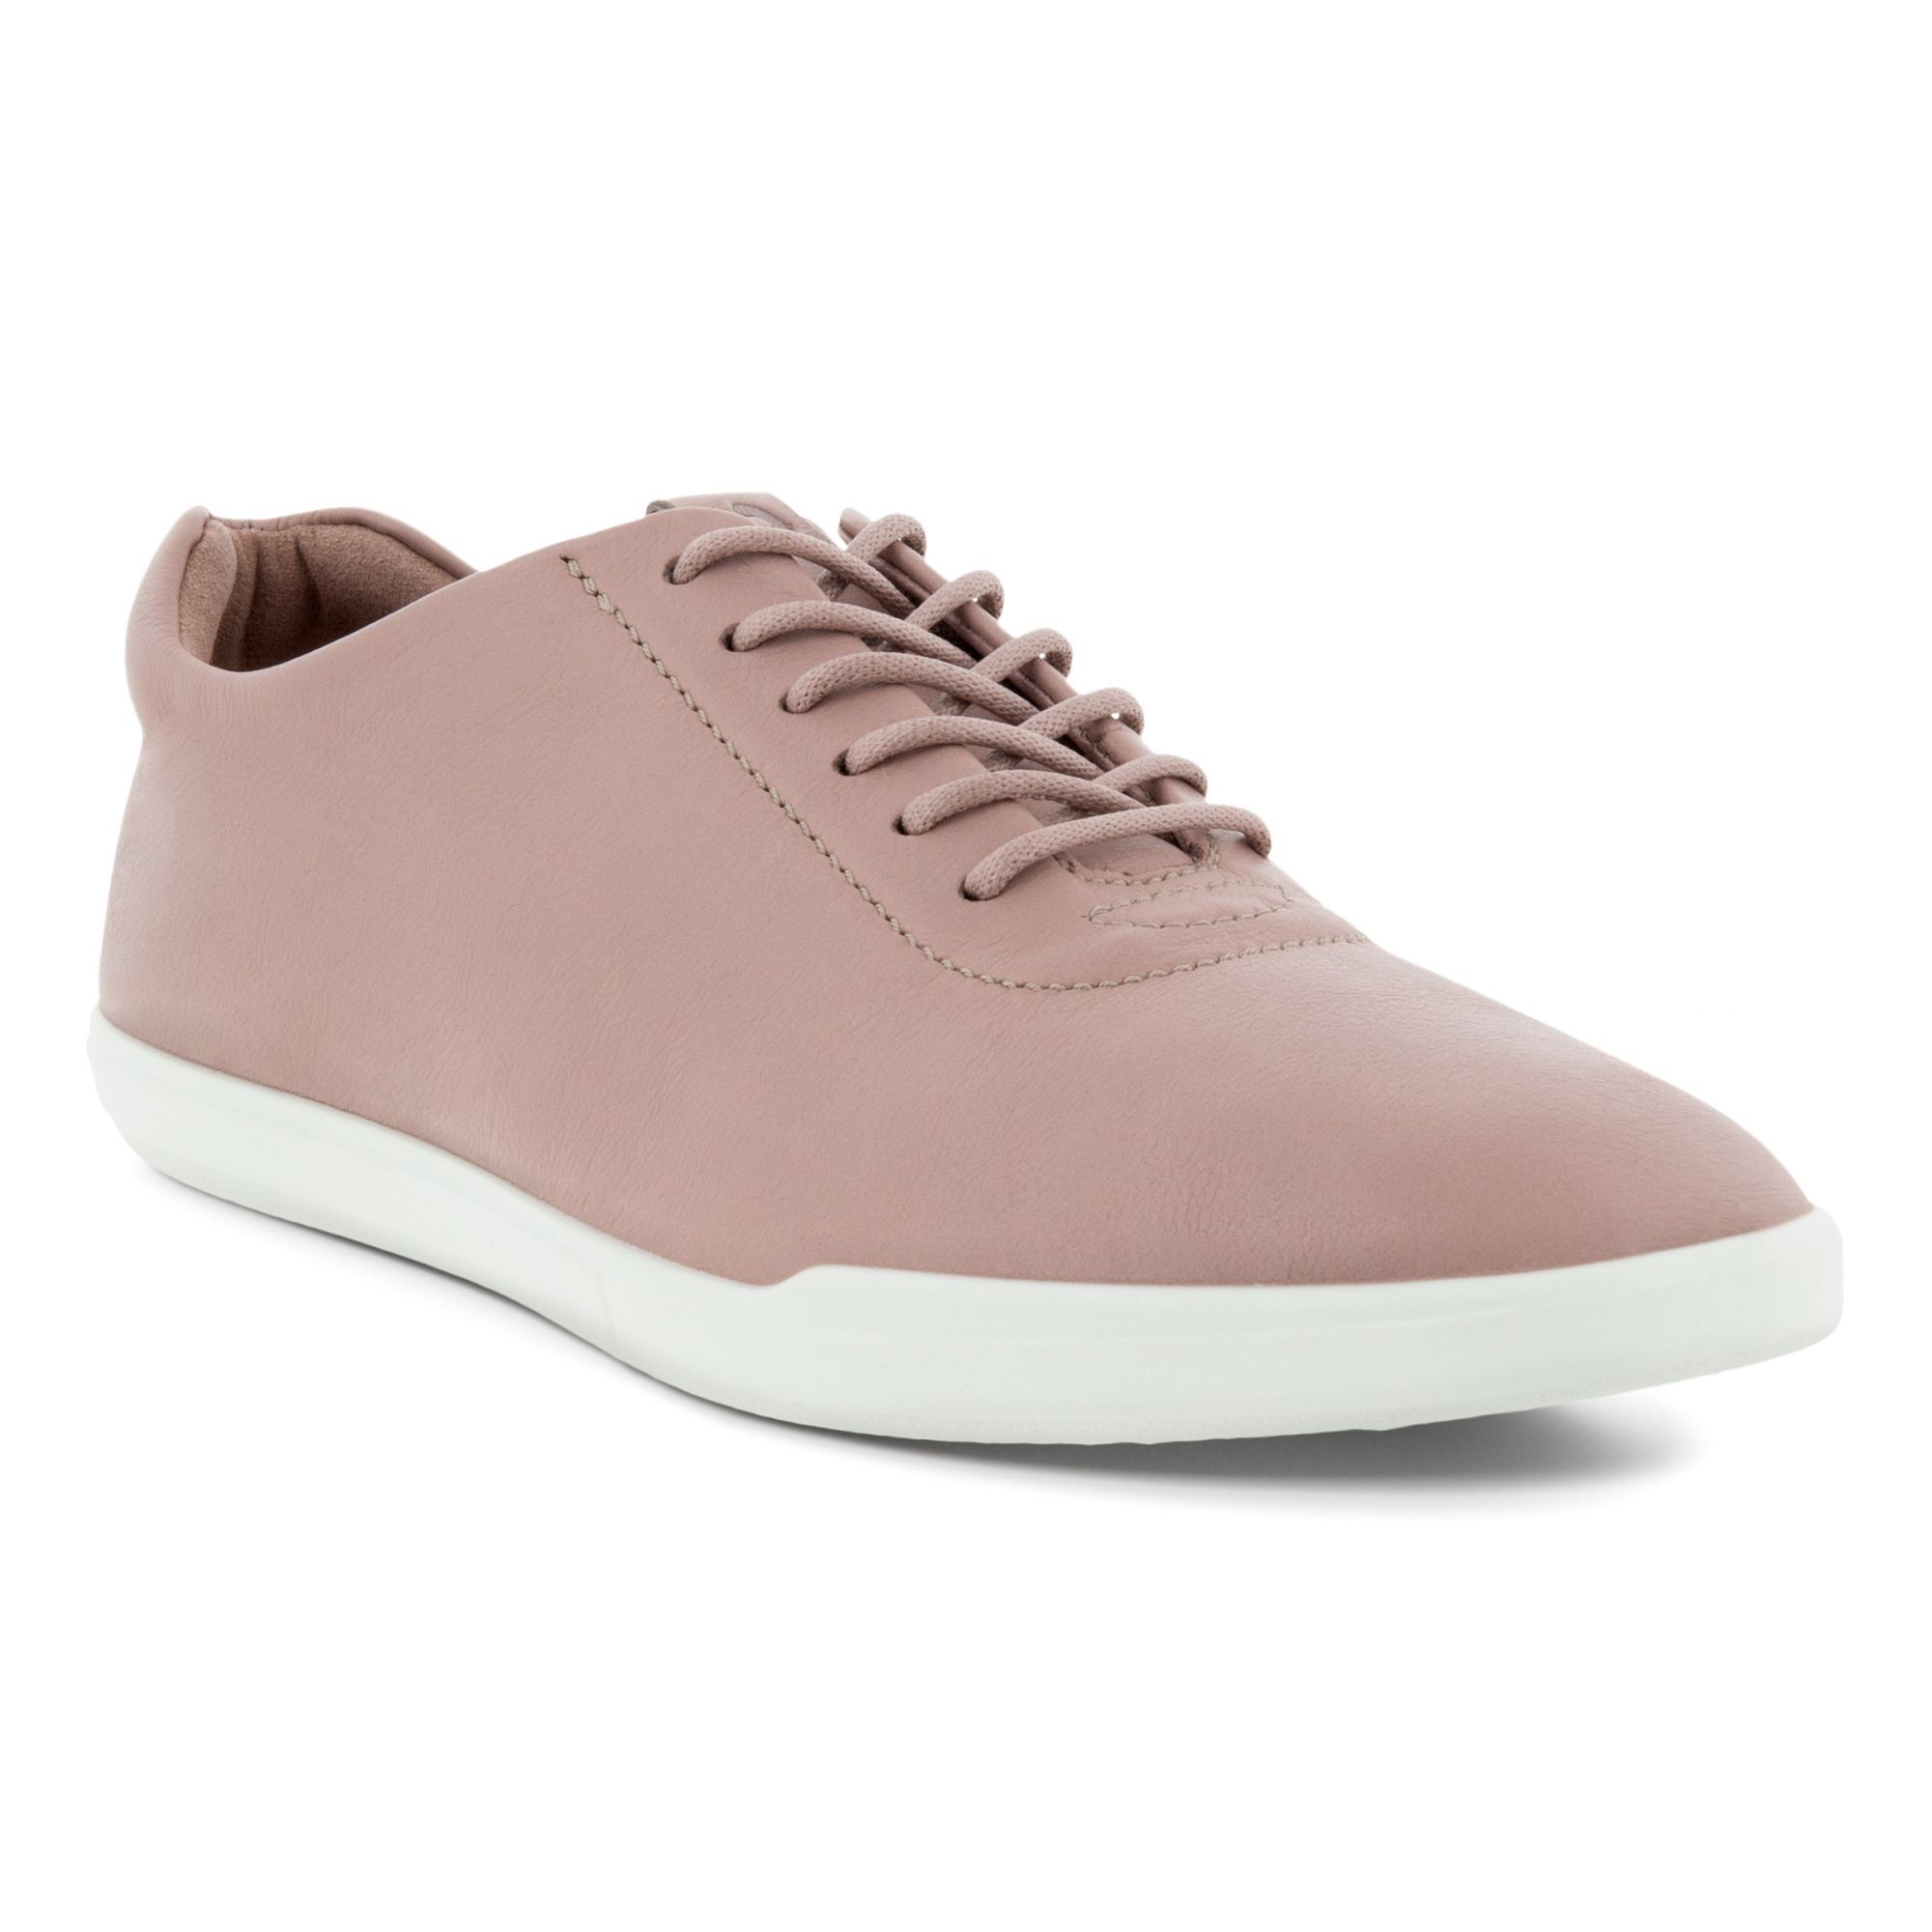 Ecco SIMPIL W Shoe 35 - Products - Veryk Mall - Veryk Mall, many